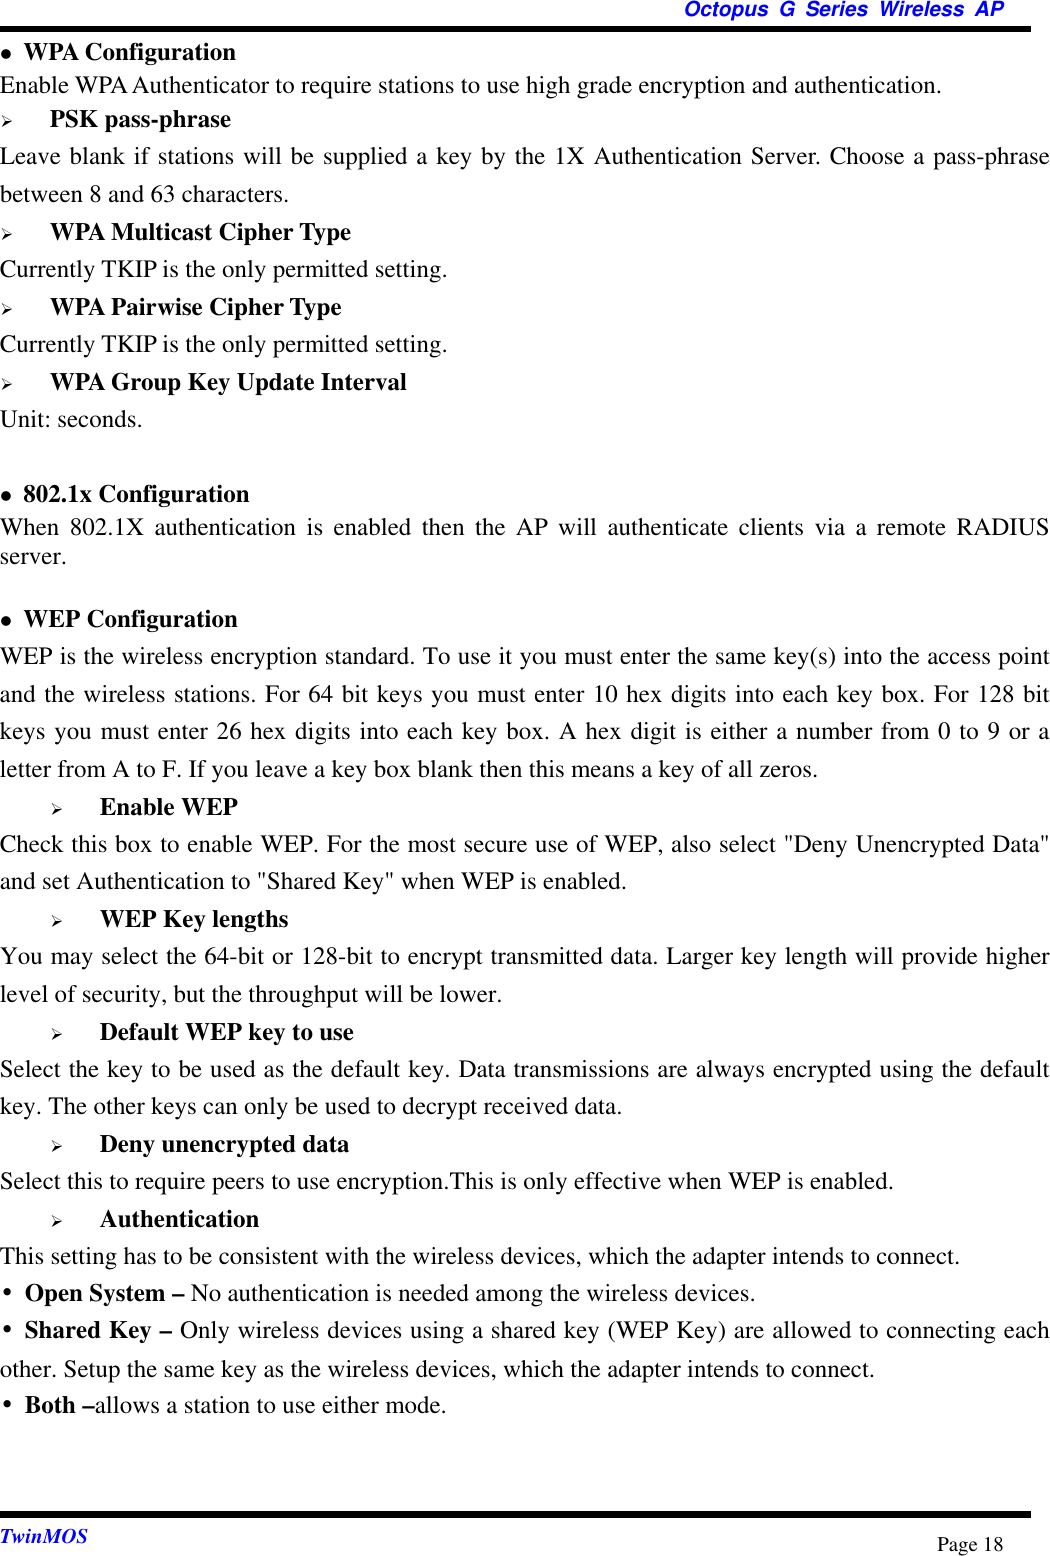  Octopus G Series Wireless AP  TwinMOS  Page 18 WPA Configuration   Enable WPA Authenticator to require stations to use high grade encryption and authentication.   PSK pass-phrase Leave blank if stations will be supplied a key by the 1X Authentication Server. Choose a pass-phrase between 8 and 63 characters.   WPA Multicast Cipher Type Currently TKIP is the only permitted setting.   WPA Pairwise Cipher Type Currently TKIP is the only permitted setting.   WPA Group Key Update Interval Unit: seconds.   802.1x Configuration When 802.1X authentication is enabled then the AP will authenticate clients via a remote RADIUS server.   WEP Configuration   WEP is the wireless encryption standard. To use it you must enter the same key(s) into the access point and the wireless stations. For 64 bit keys you must enter 10 hex digits into each key box. For 128 bit keys you must enter 26 hex digits into each key box. A hex digit is either a number from 0 to 9 or a letter from A to F. If you leave a key box blank then this means a key of all zeros.   Enable WEP Check this box to enable WEP. For the most secure use of WEP, also select &quot;Deny Unencrypted Data&quot; and set Authentication to &quot;Shared Key&quot; when WEP is enabled.   WEP Key lengths You may select the 64-bit or 128-bit to encrypt transmitted data. Larger key length will provide higher level of security, but the throughput will be lower.   Default WEP key to use Select the key to be used as the default key. Data transmissions are always encrypted using the default key. The other keys can only be used to decrypt received data.   Deny unencrypted data Select this to require peers to use encryption.This is only effective when WEP is enabled.   Authentication This setting has to be consistent with the wireless devices, which the adapter intends to connect. •Open System – No authentication is needed among the wireless devices. •Shared Key – Only wireless devices using a shared key (WEP Key) are allowed to connecting each other. Setup the same key as the wireless devices, which the adapter intends to connect. •Both –allows a station to use either mode.   